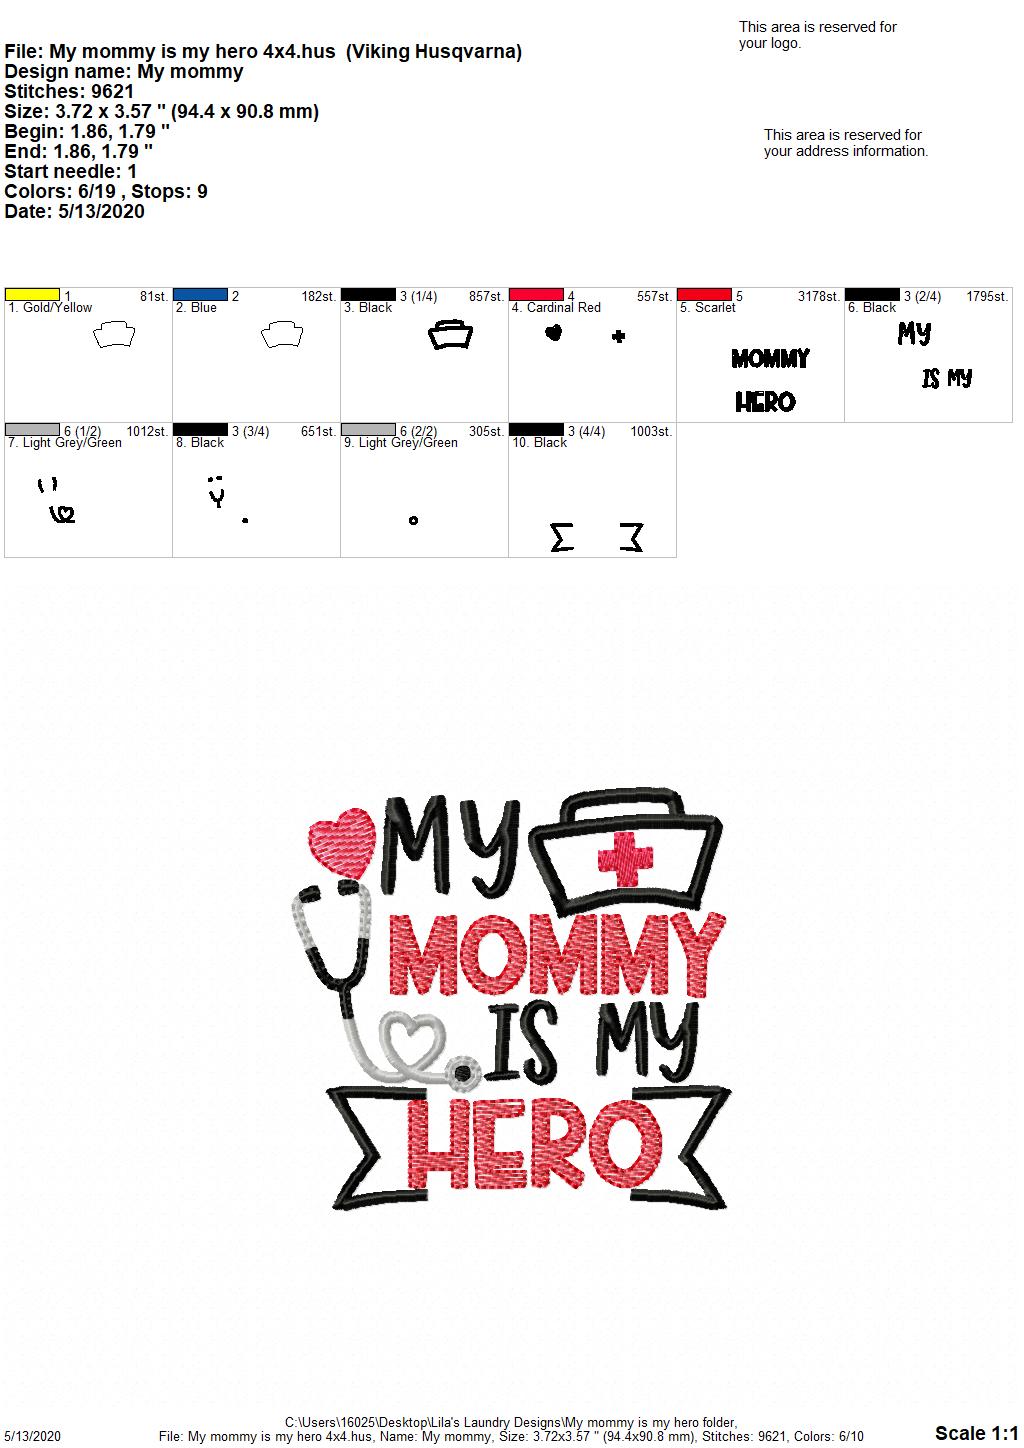 My Mommy is My Hero - 4 Sizes - Digital Embroidery Design